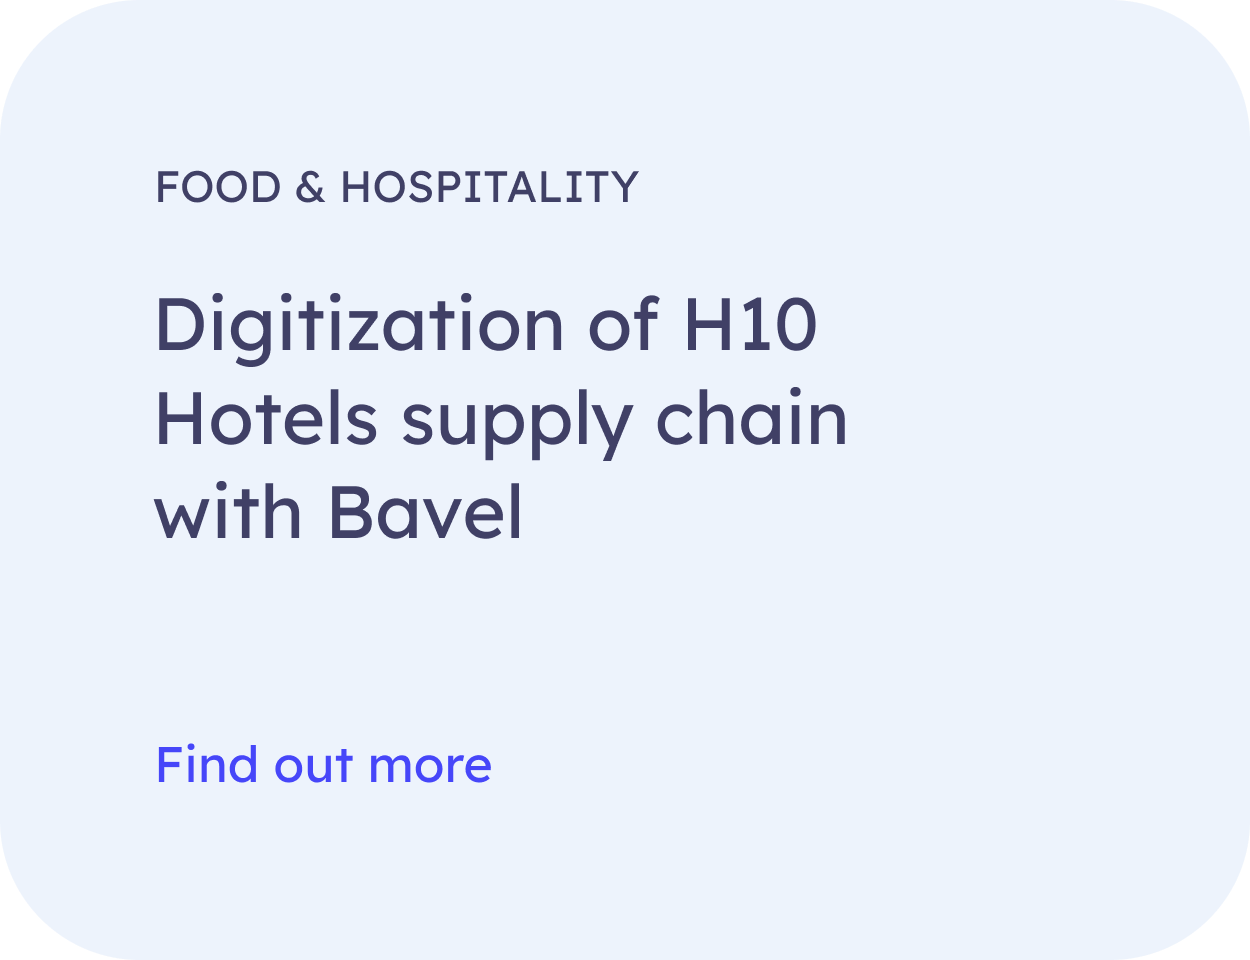 Digitization of H10 Hotels supply chain with Bavel